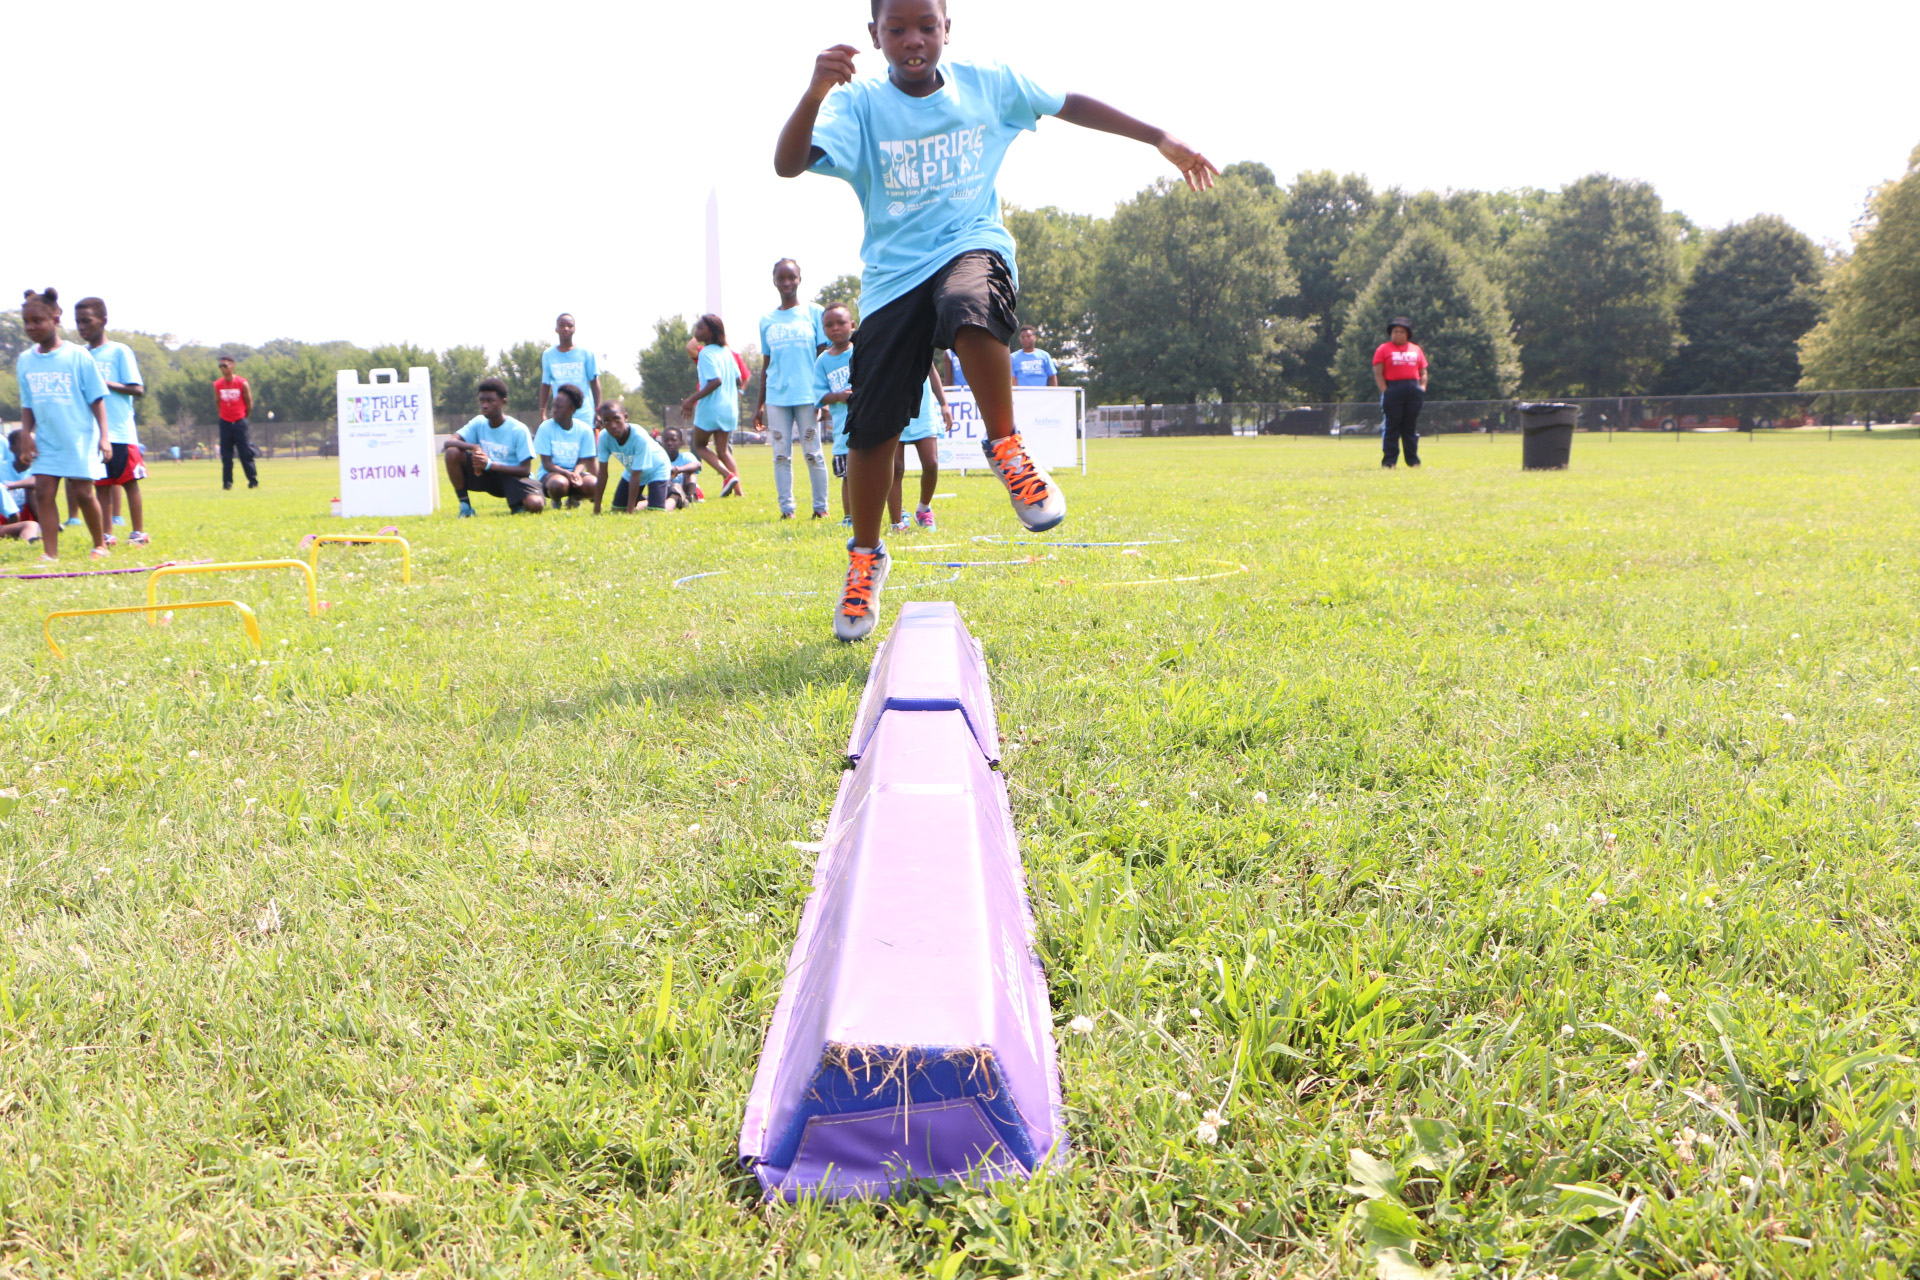 Boys & Girls Clubs of America Educate Youth Nationwide on Healthy Habits to Develop a Strong Mind, Body and Soul and Achieve Goal of 5 Million Minutes of Activity on Triple Play Day